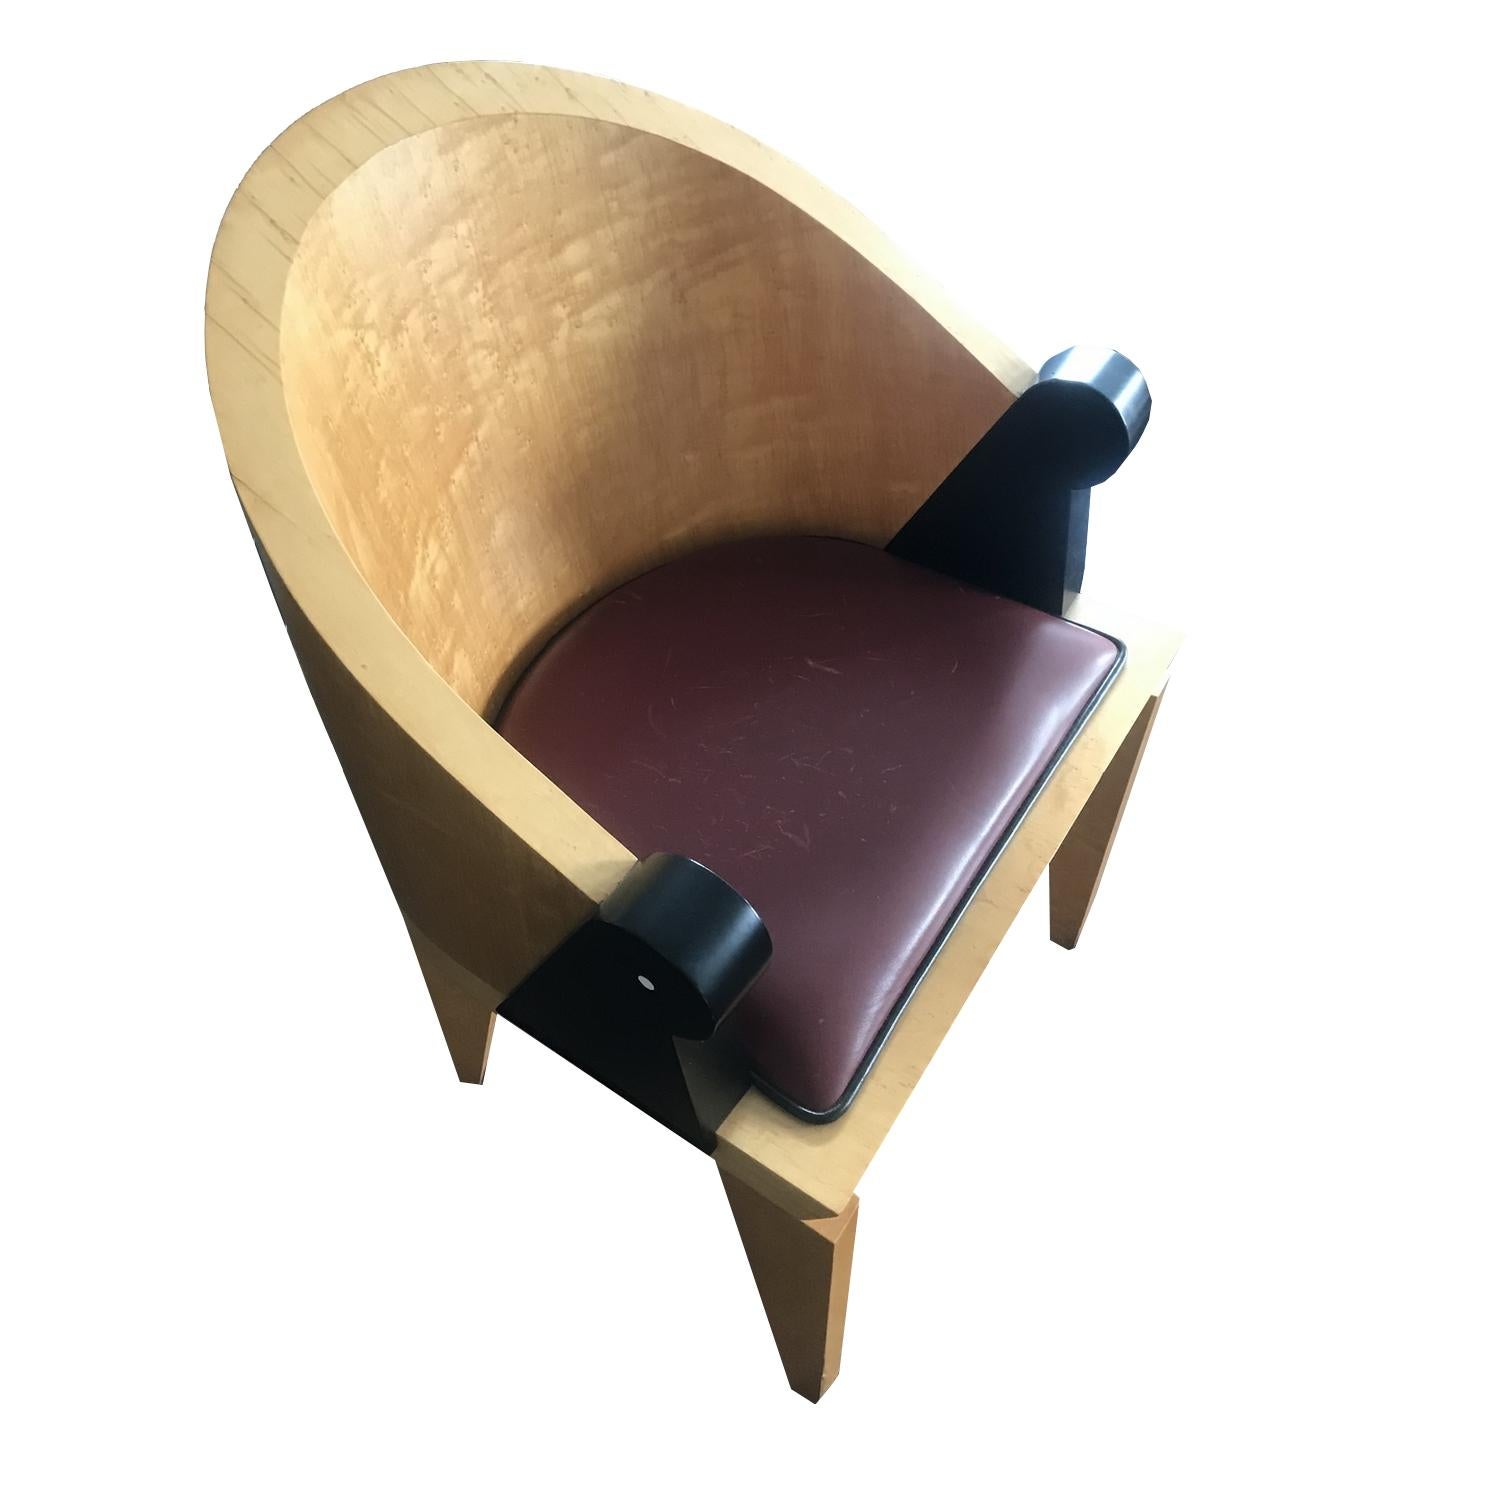 Modern In Stock in Los Angeles, Set of 2 Michael Graves Parrot Chairs Burgundy Leather